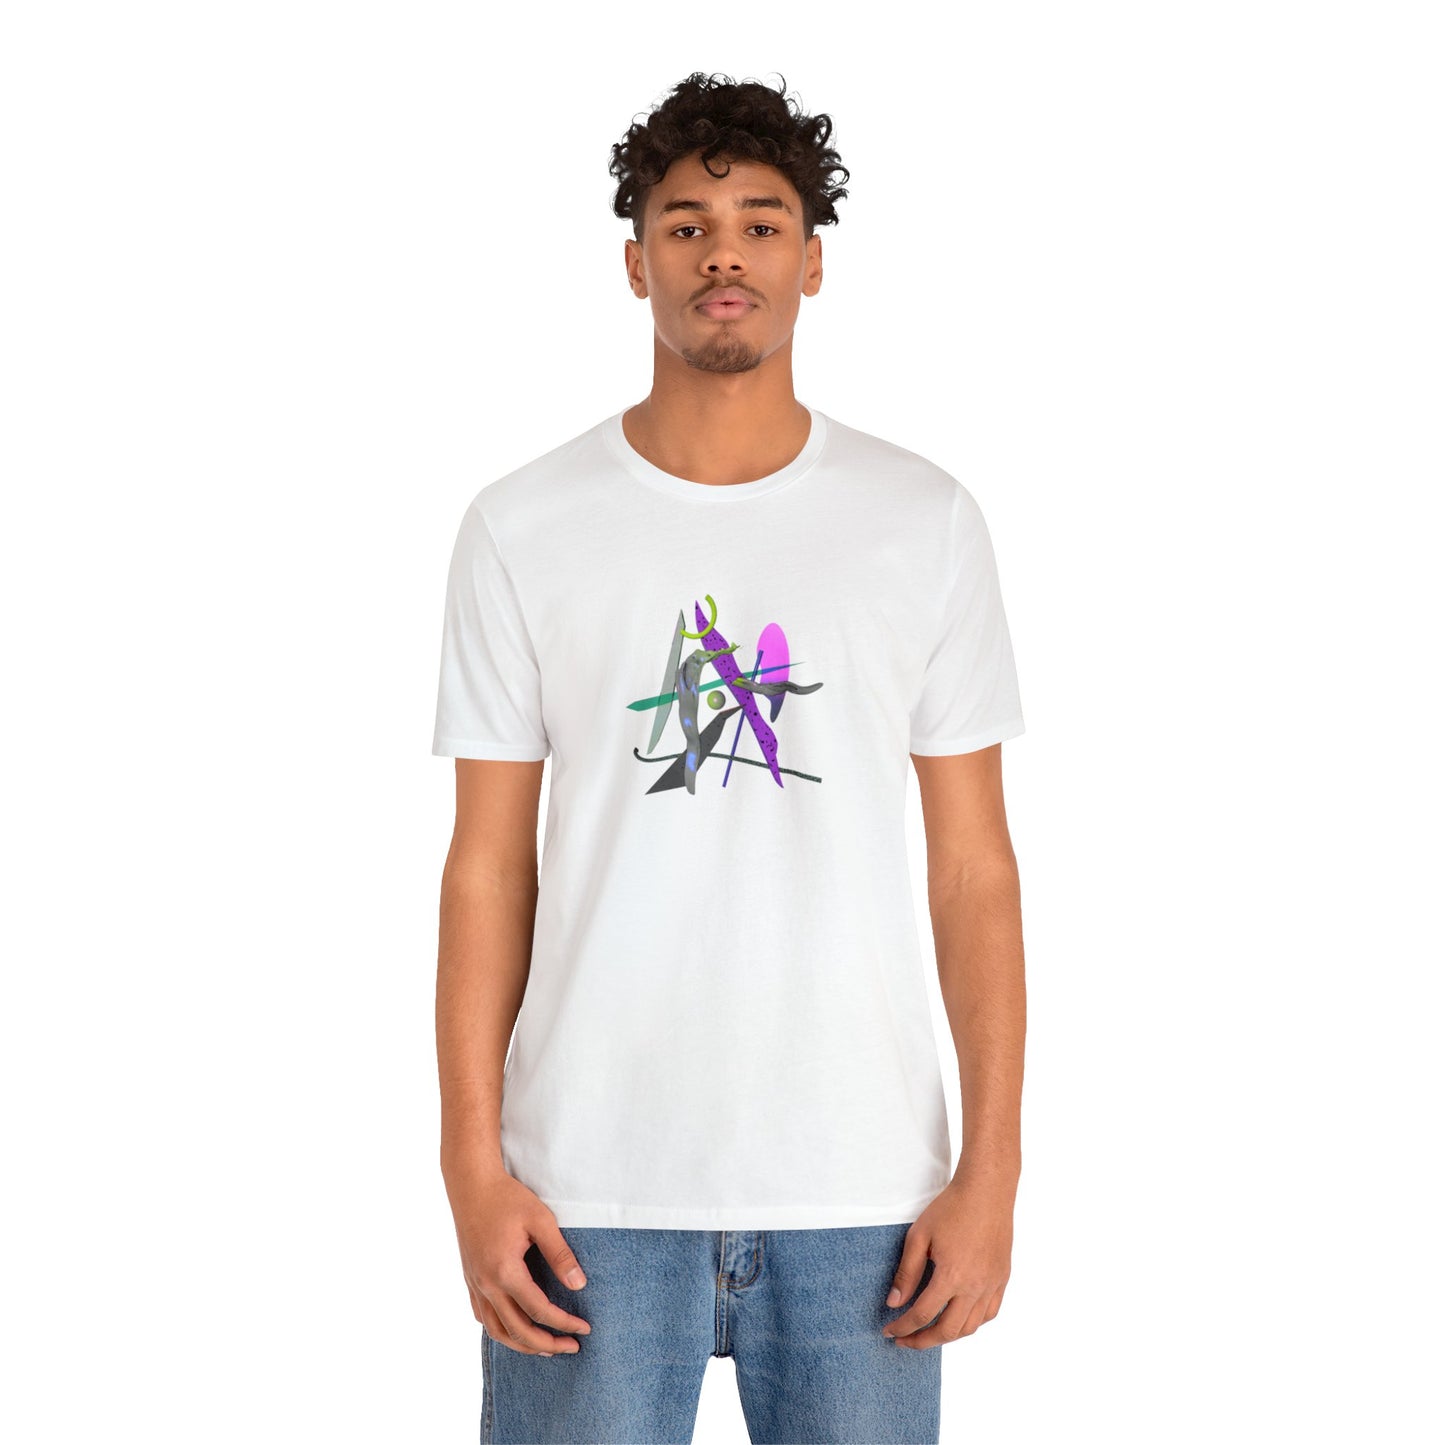 Post-Abstract Unisex T-Shirt